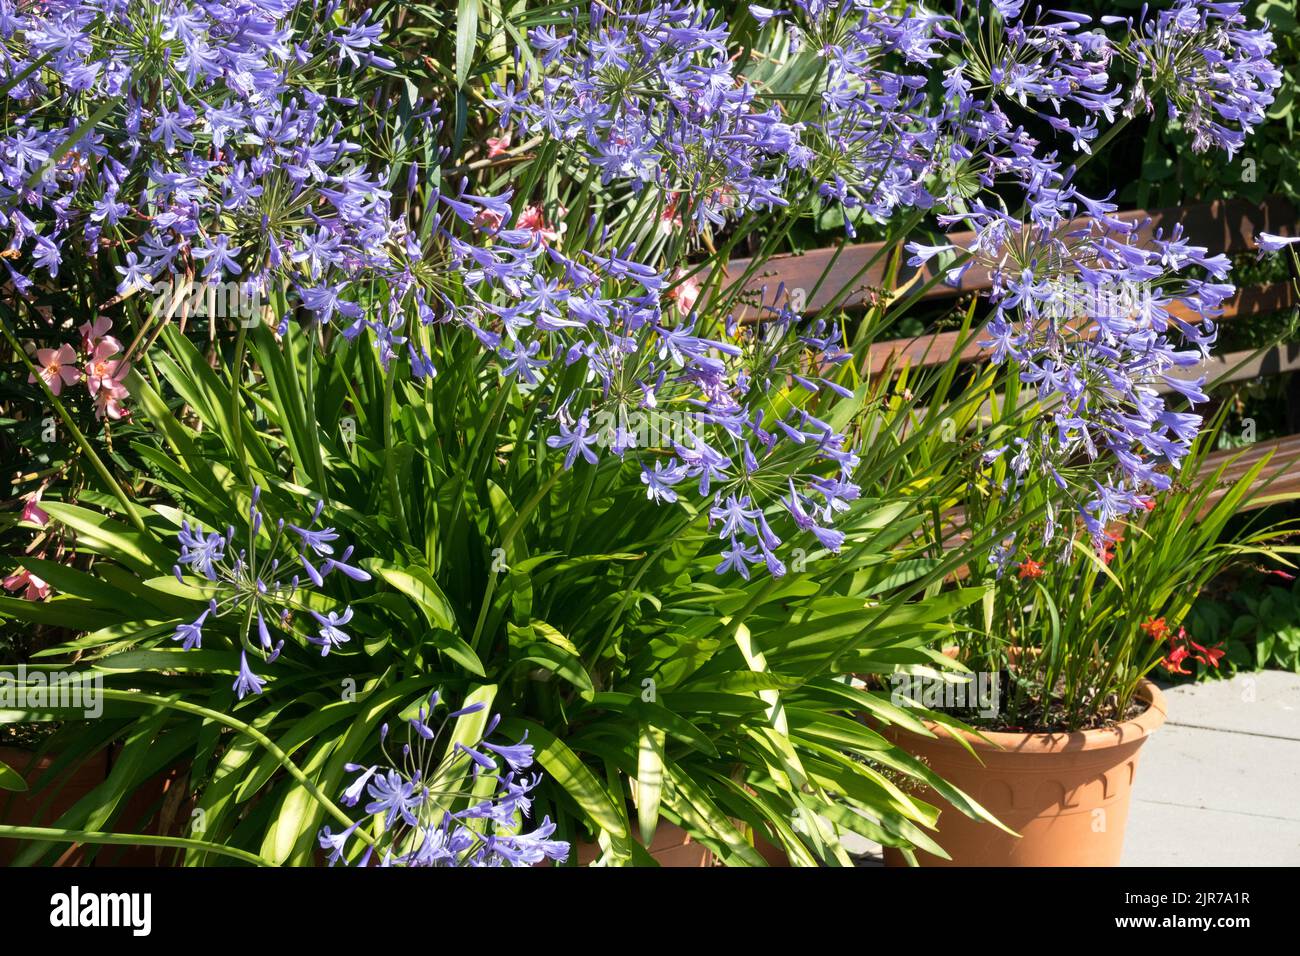 African Lily, Agapanthus, Lily of the Nile, Plant, African Blue Lily, Flowers, Pot, Patio, Garden Stock Photo